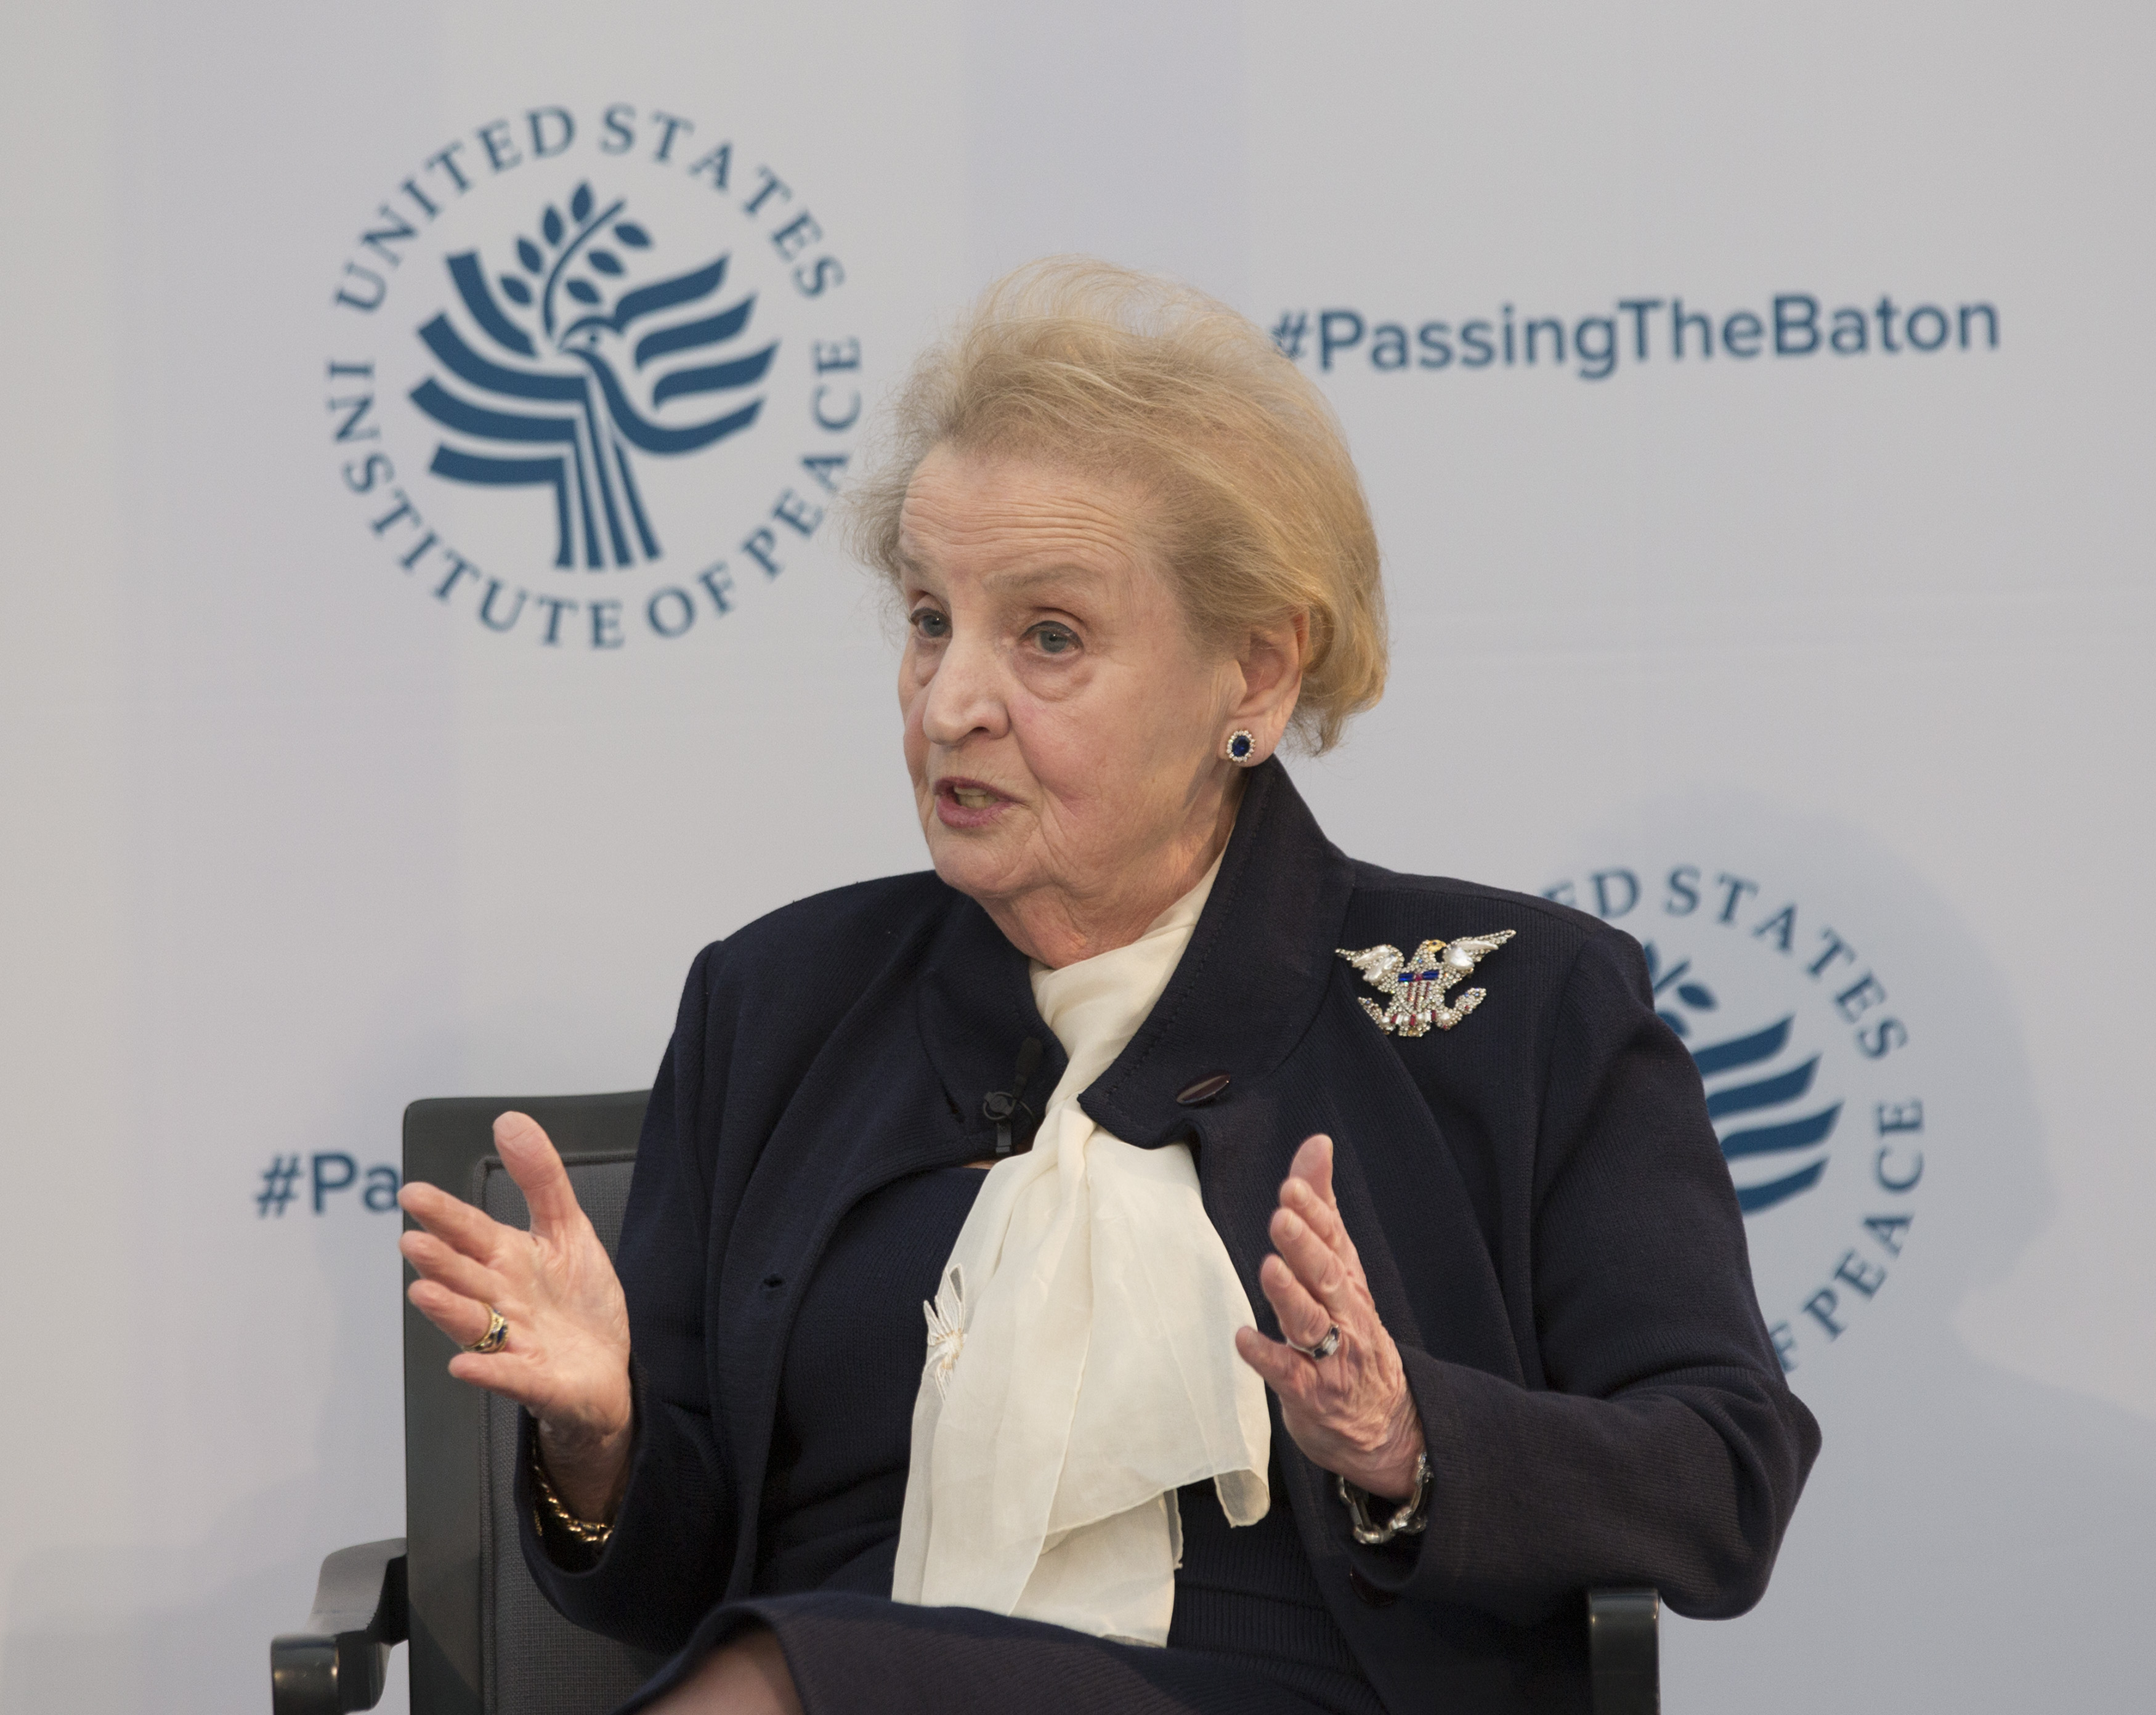 Madeleine Albright, former U.S. Secretary of State, participates in a conference on the transition of the US Presidency from Obama to Trump at the US Institute Of Peace in Washington DC, Jan. 10, 2017. (Chris Kleponis—AFP/Getty Images)